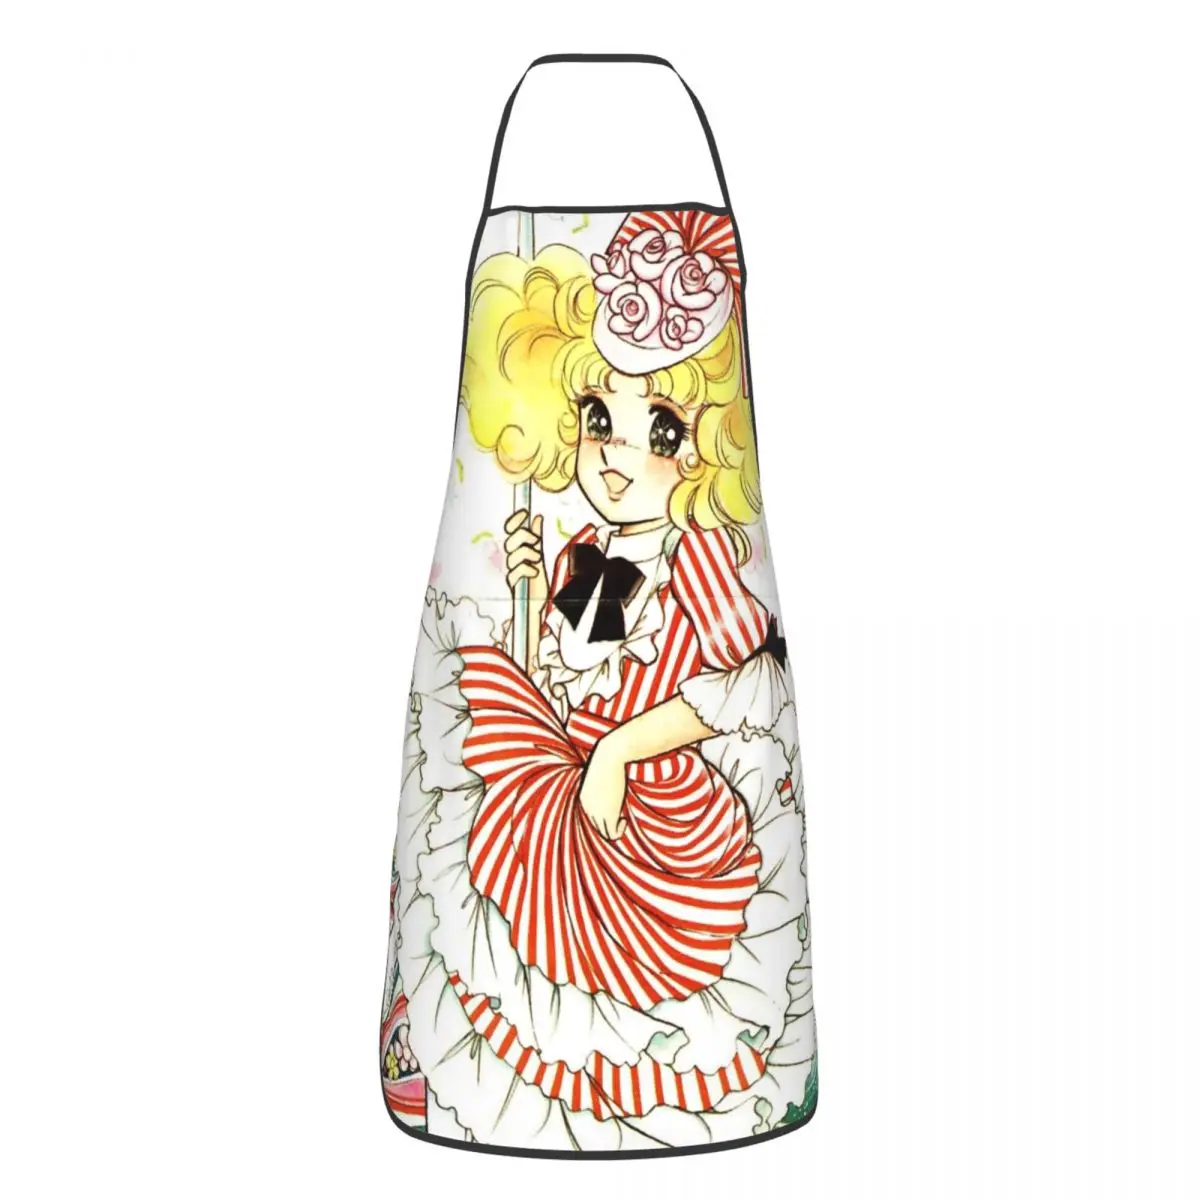 

Candy Candy Apron Cuisine Cooking Baking Household Cleaning Gardening Anni 80 Cult Color Bibs Kitchen Antifouling Tablier Chef